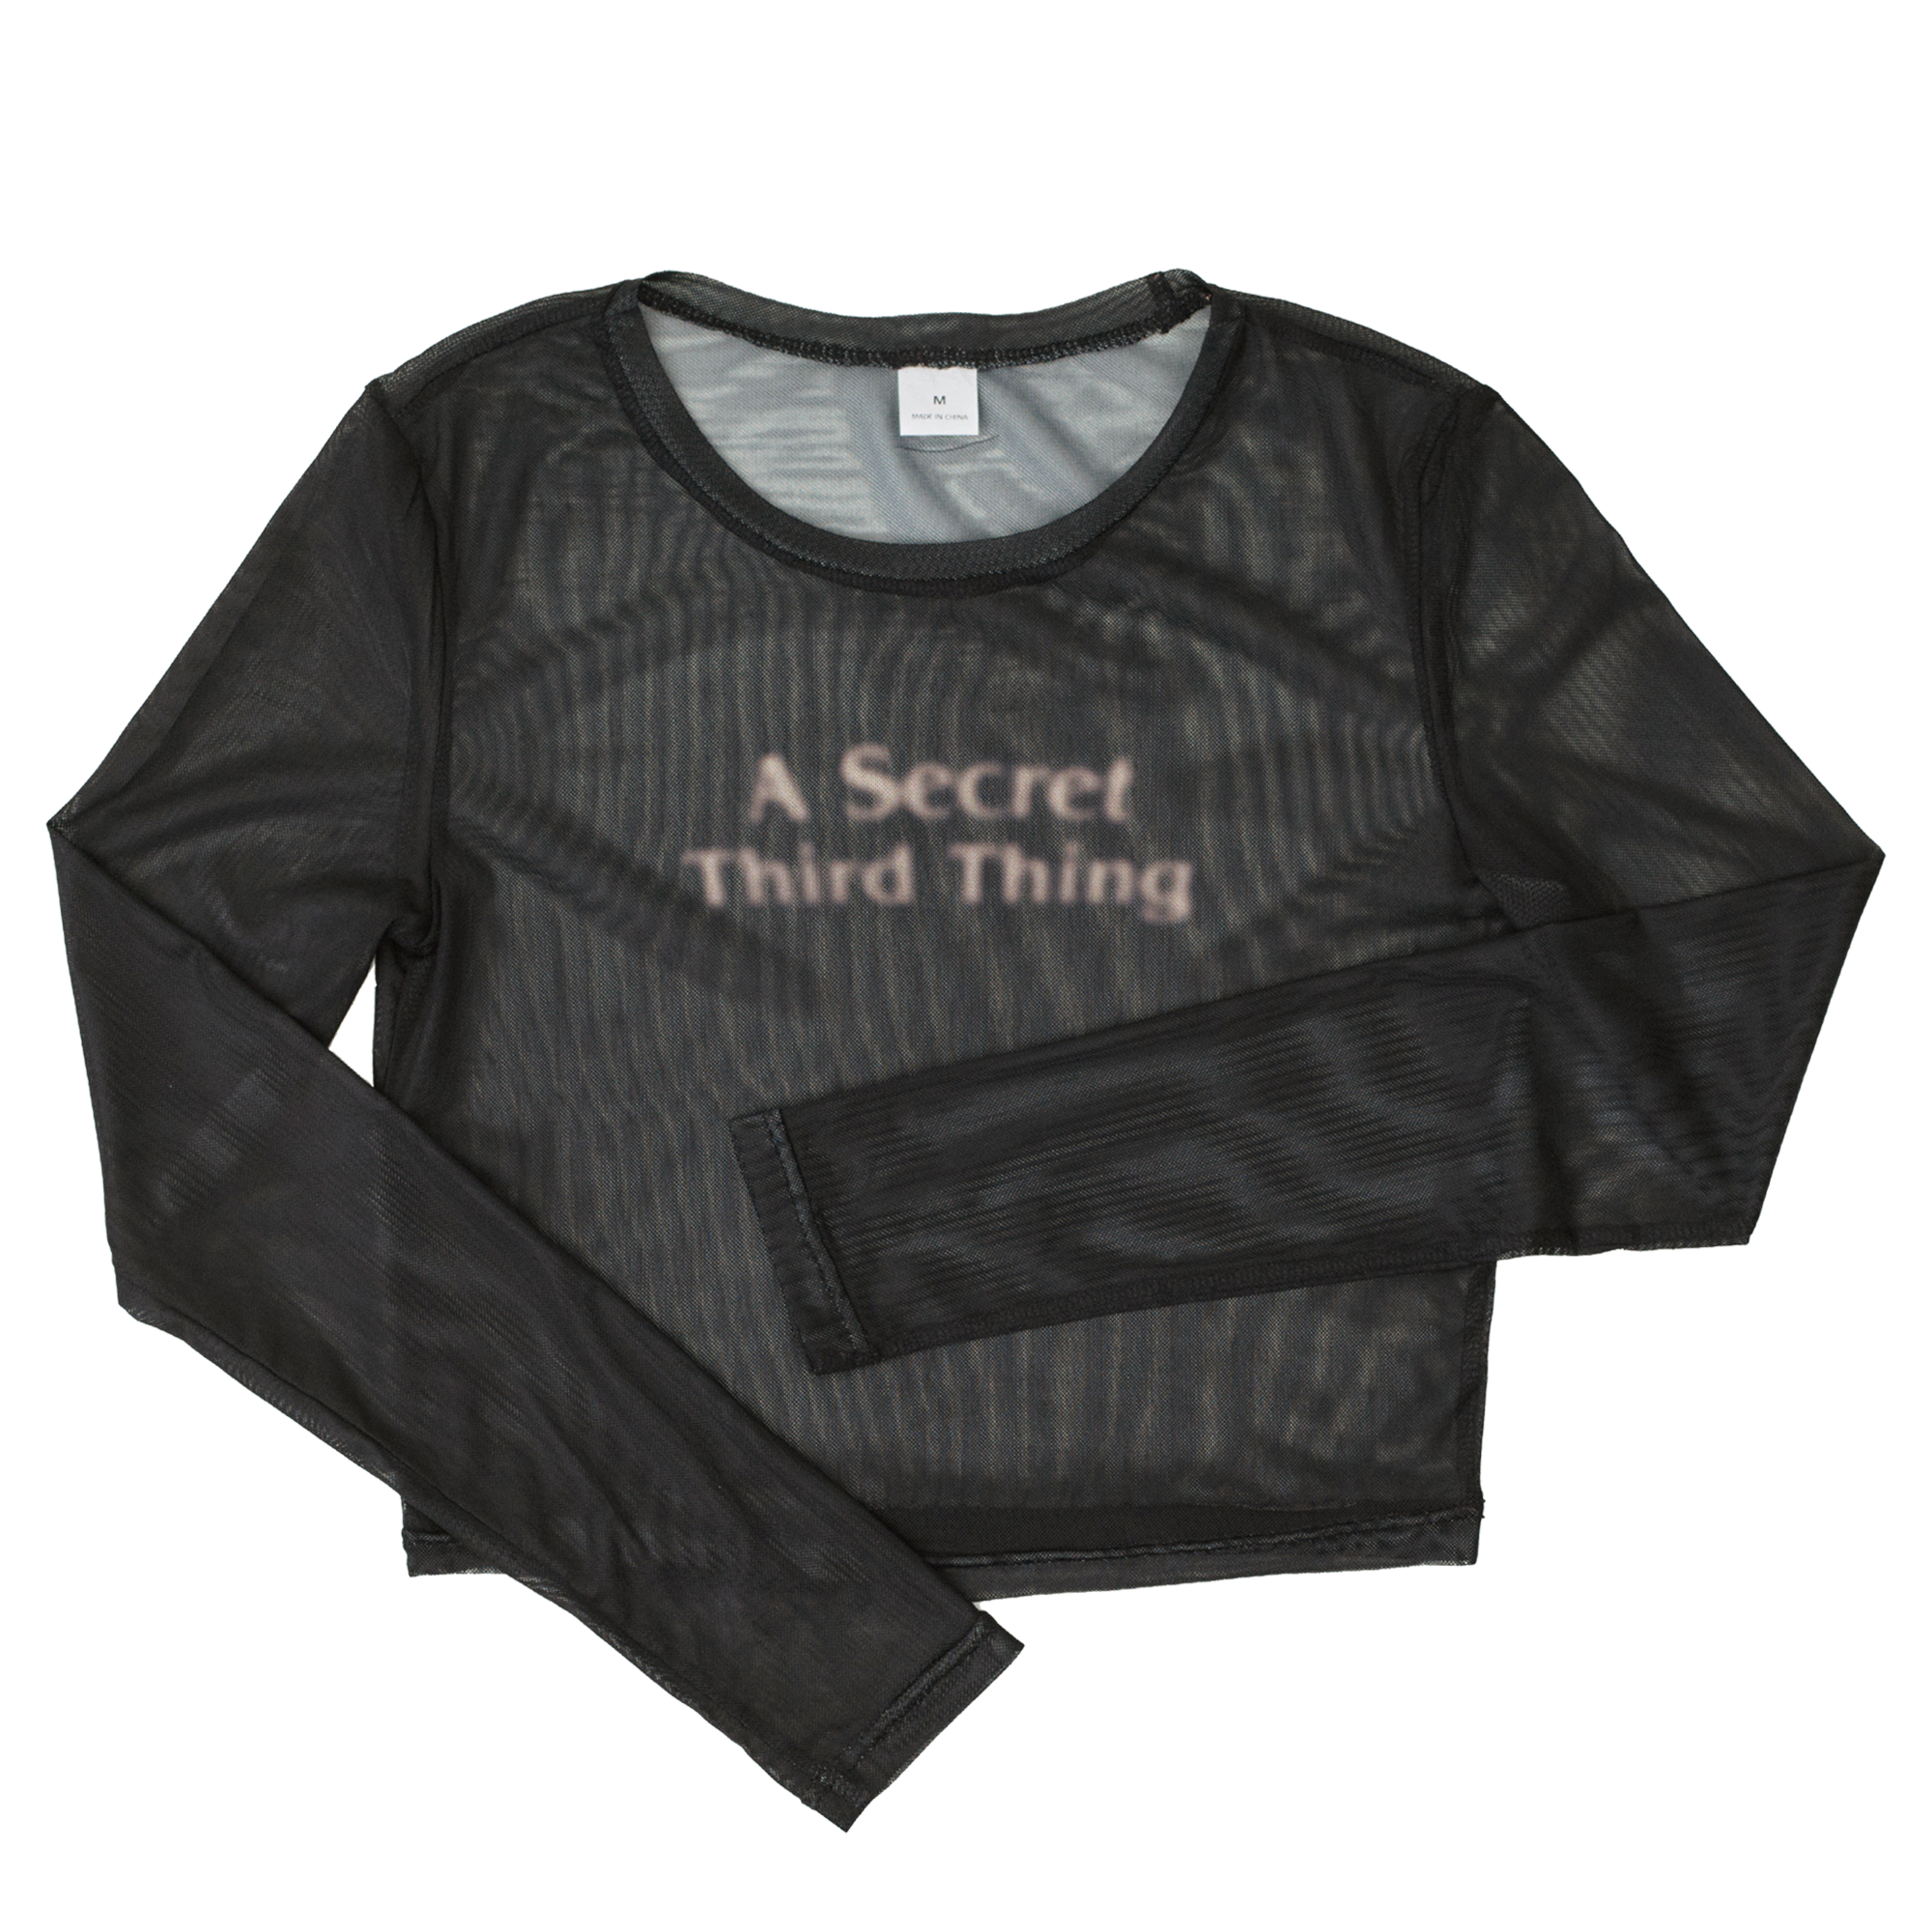 Black mesh crop top with long sleeves. Text reads "A Secret Third Thing"